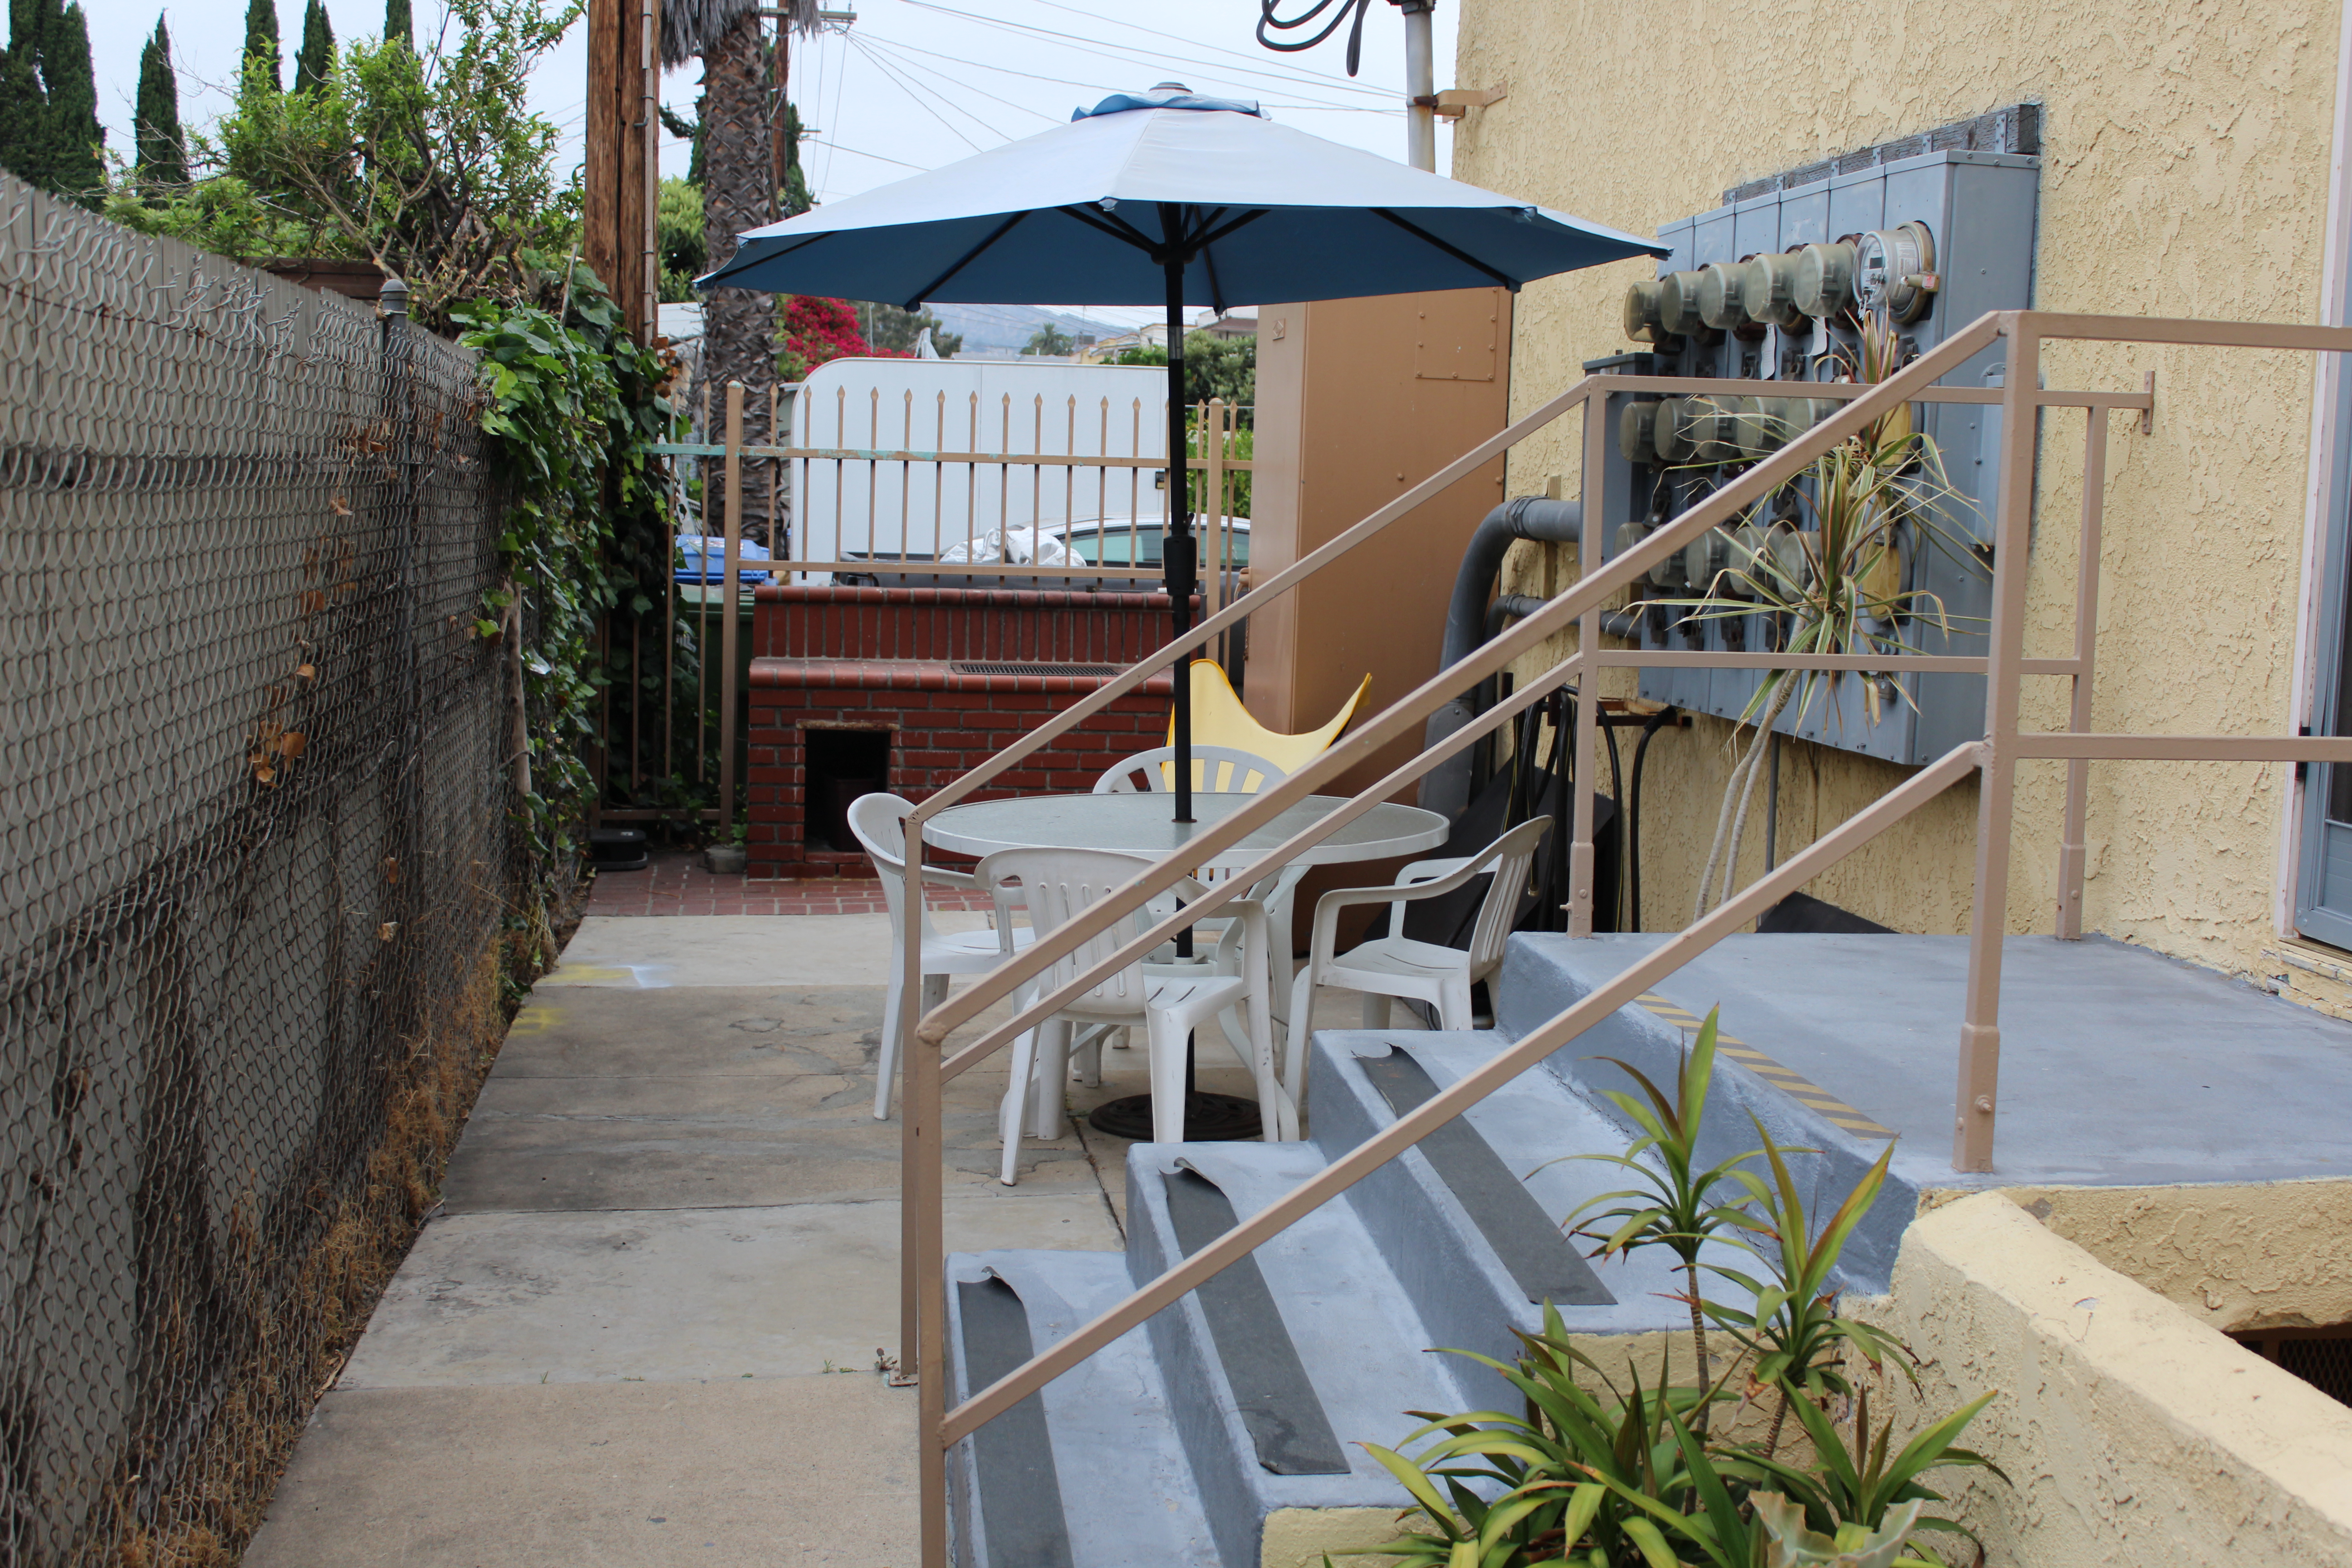 Back patio with a table. chairs, and outdoor umbrella next to electrical panel and stairs with hand rails.